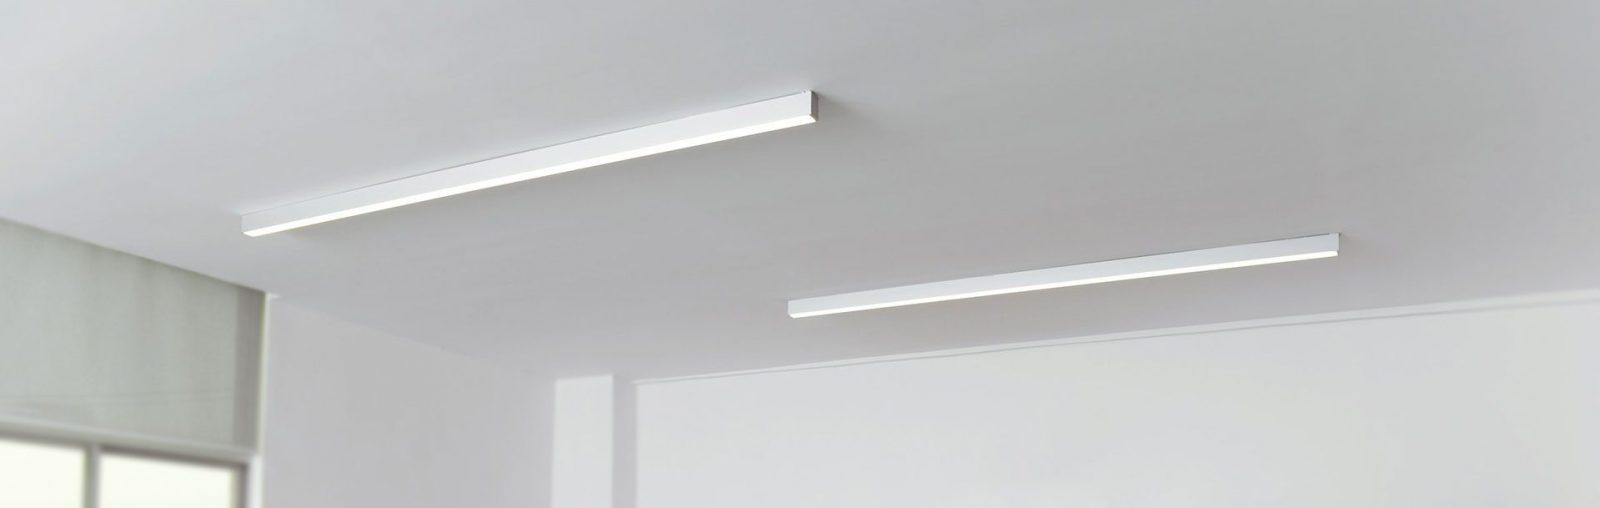 Barre LED a soffitto made in Italy - Virdemlux